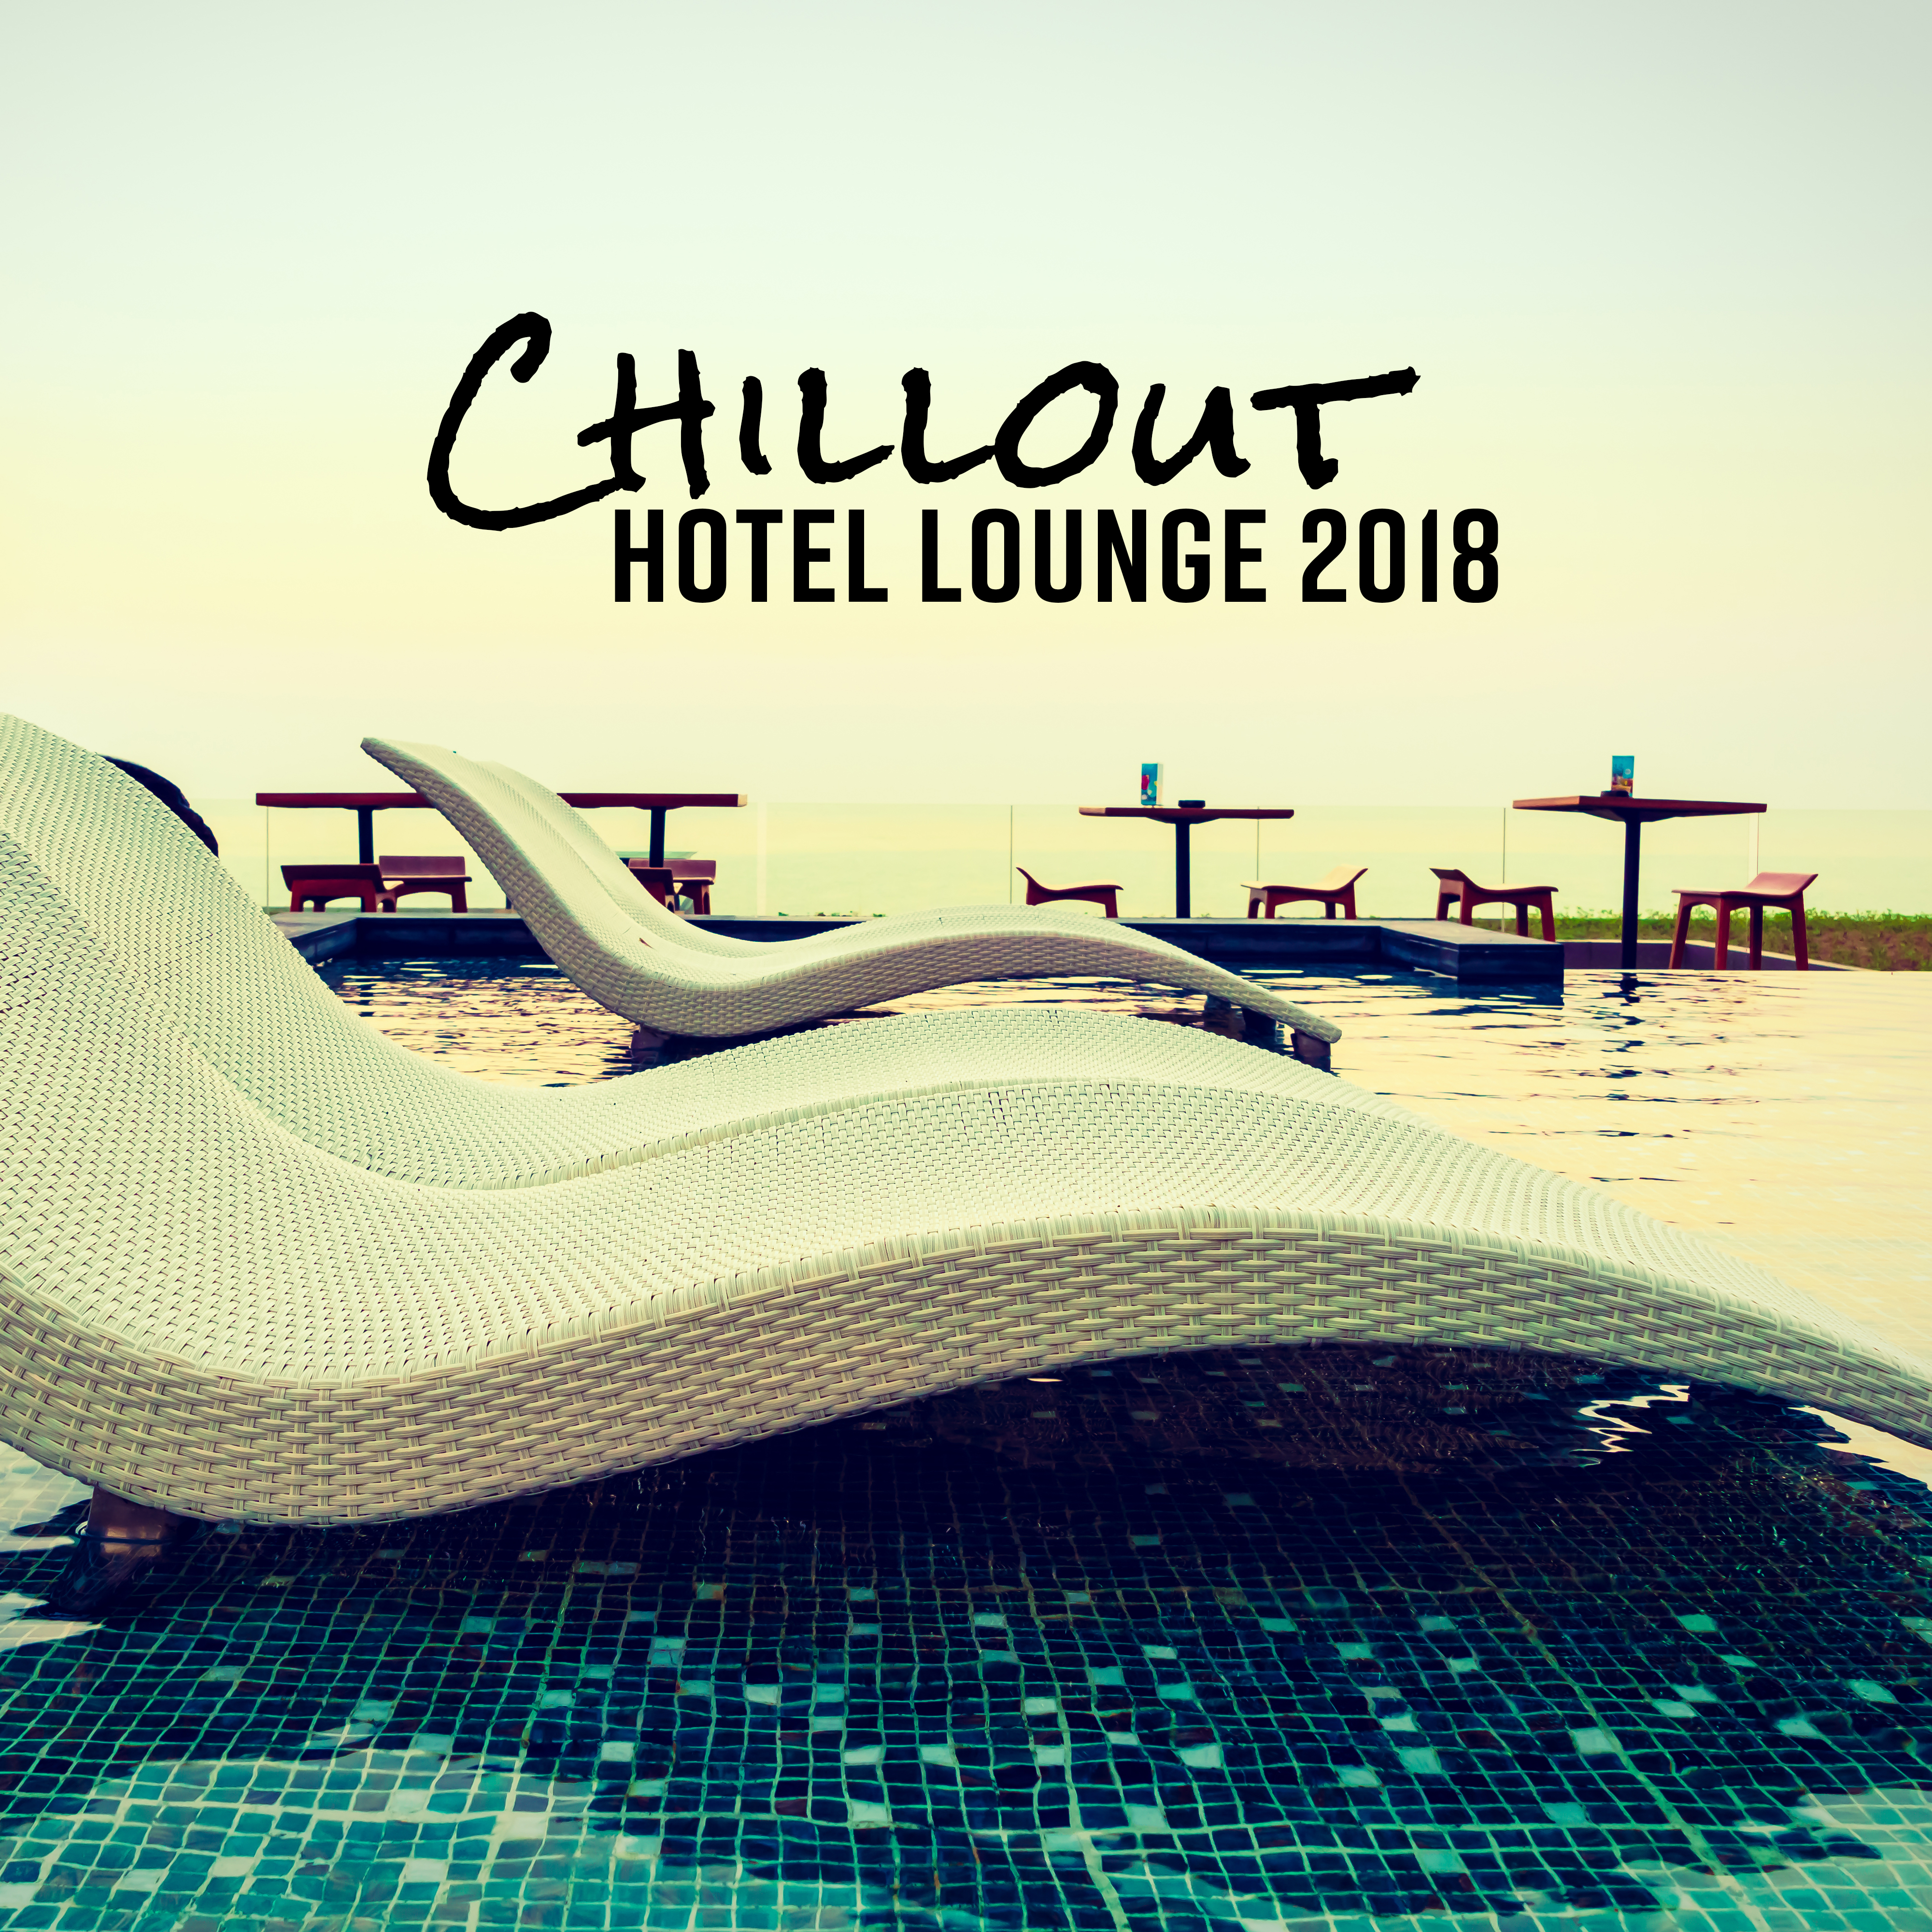 Chillout Hotel Lounge 2018